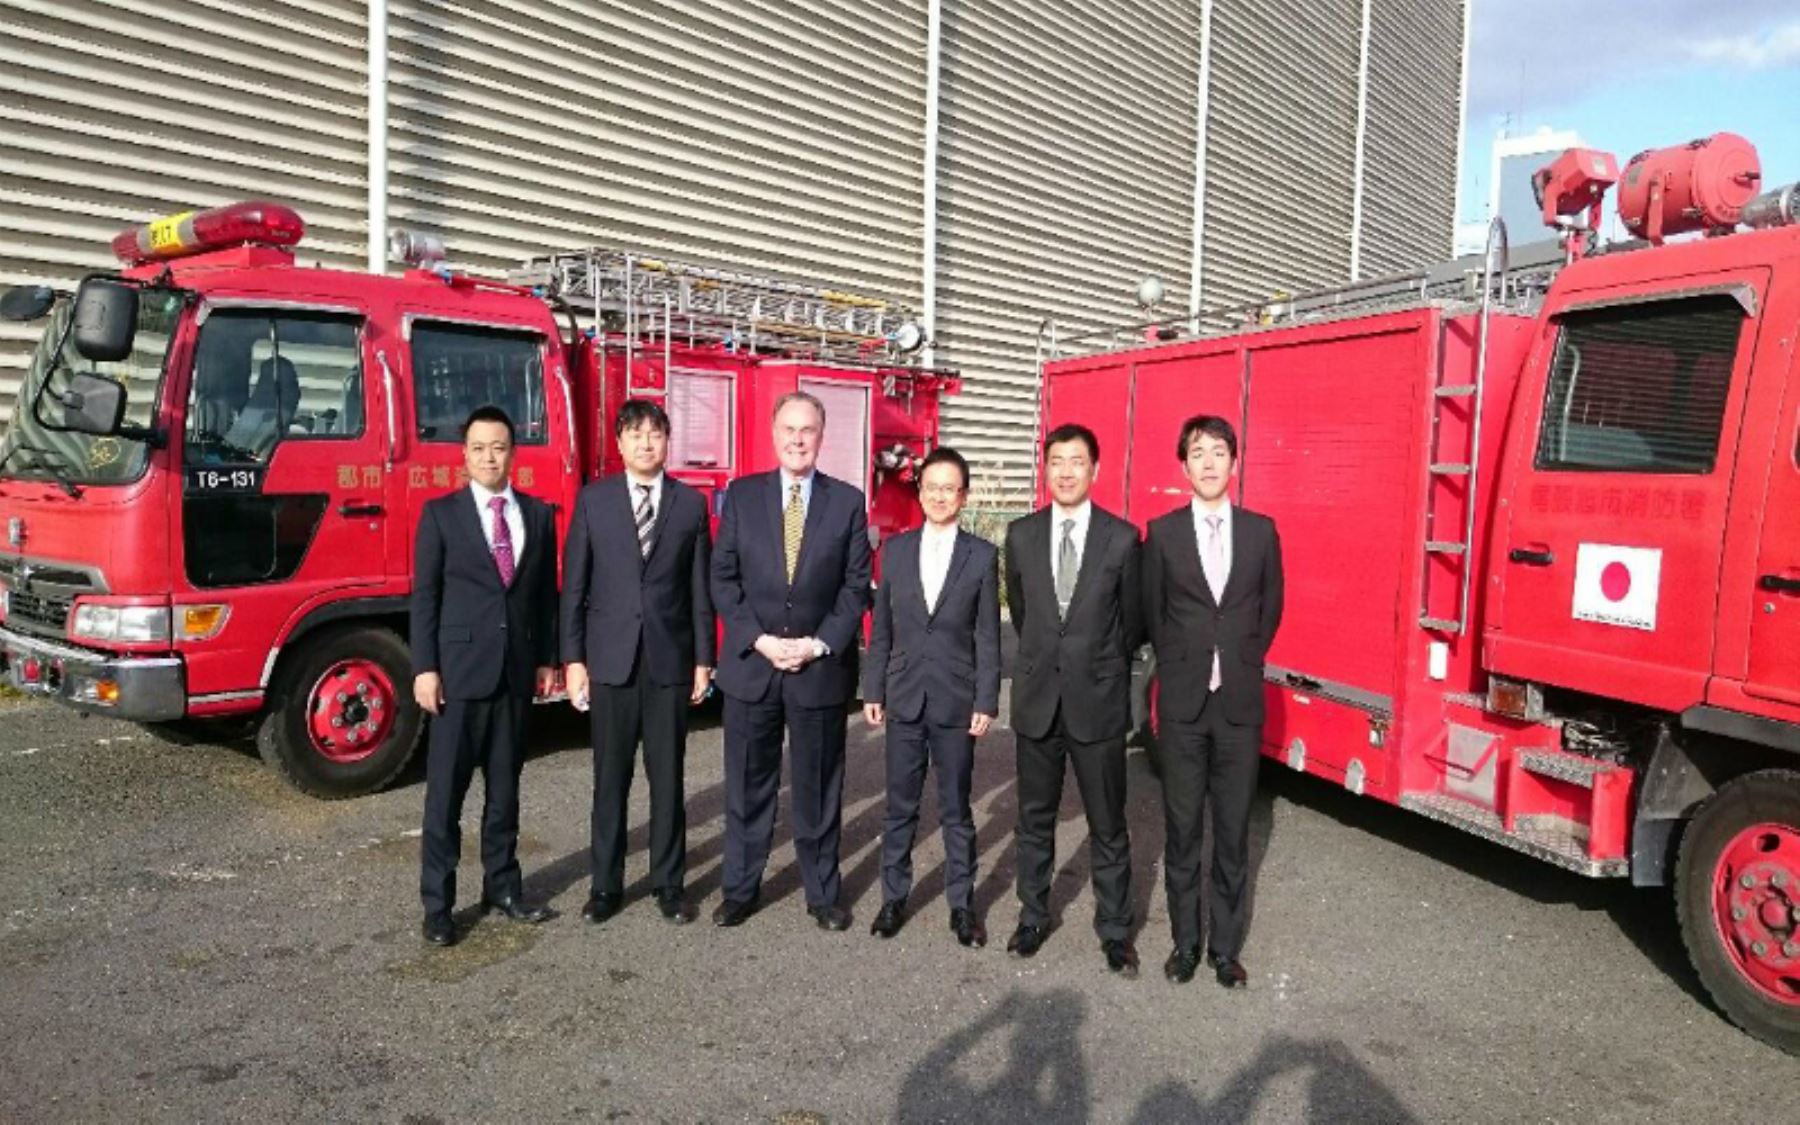 Japan donates mobile units to Peruvian firefighters